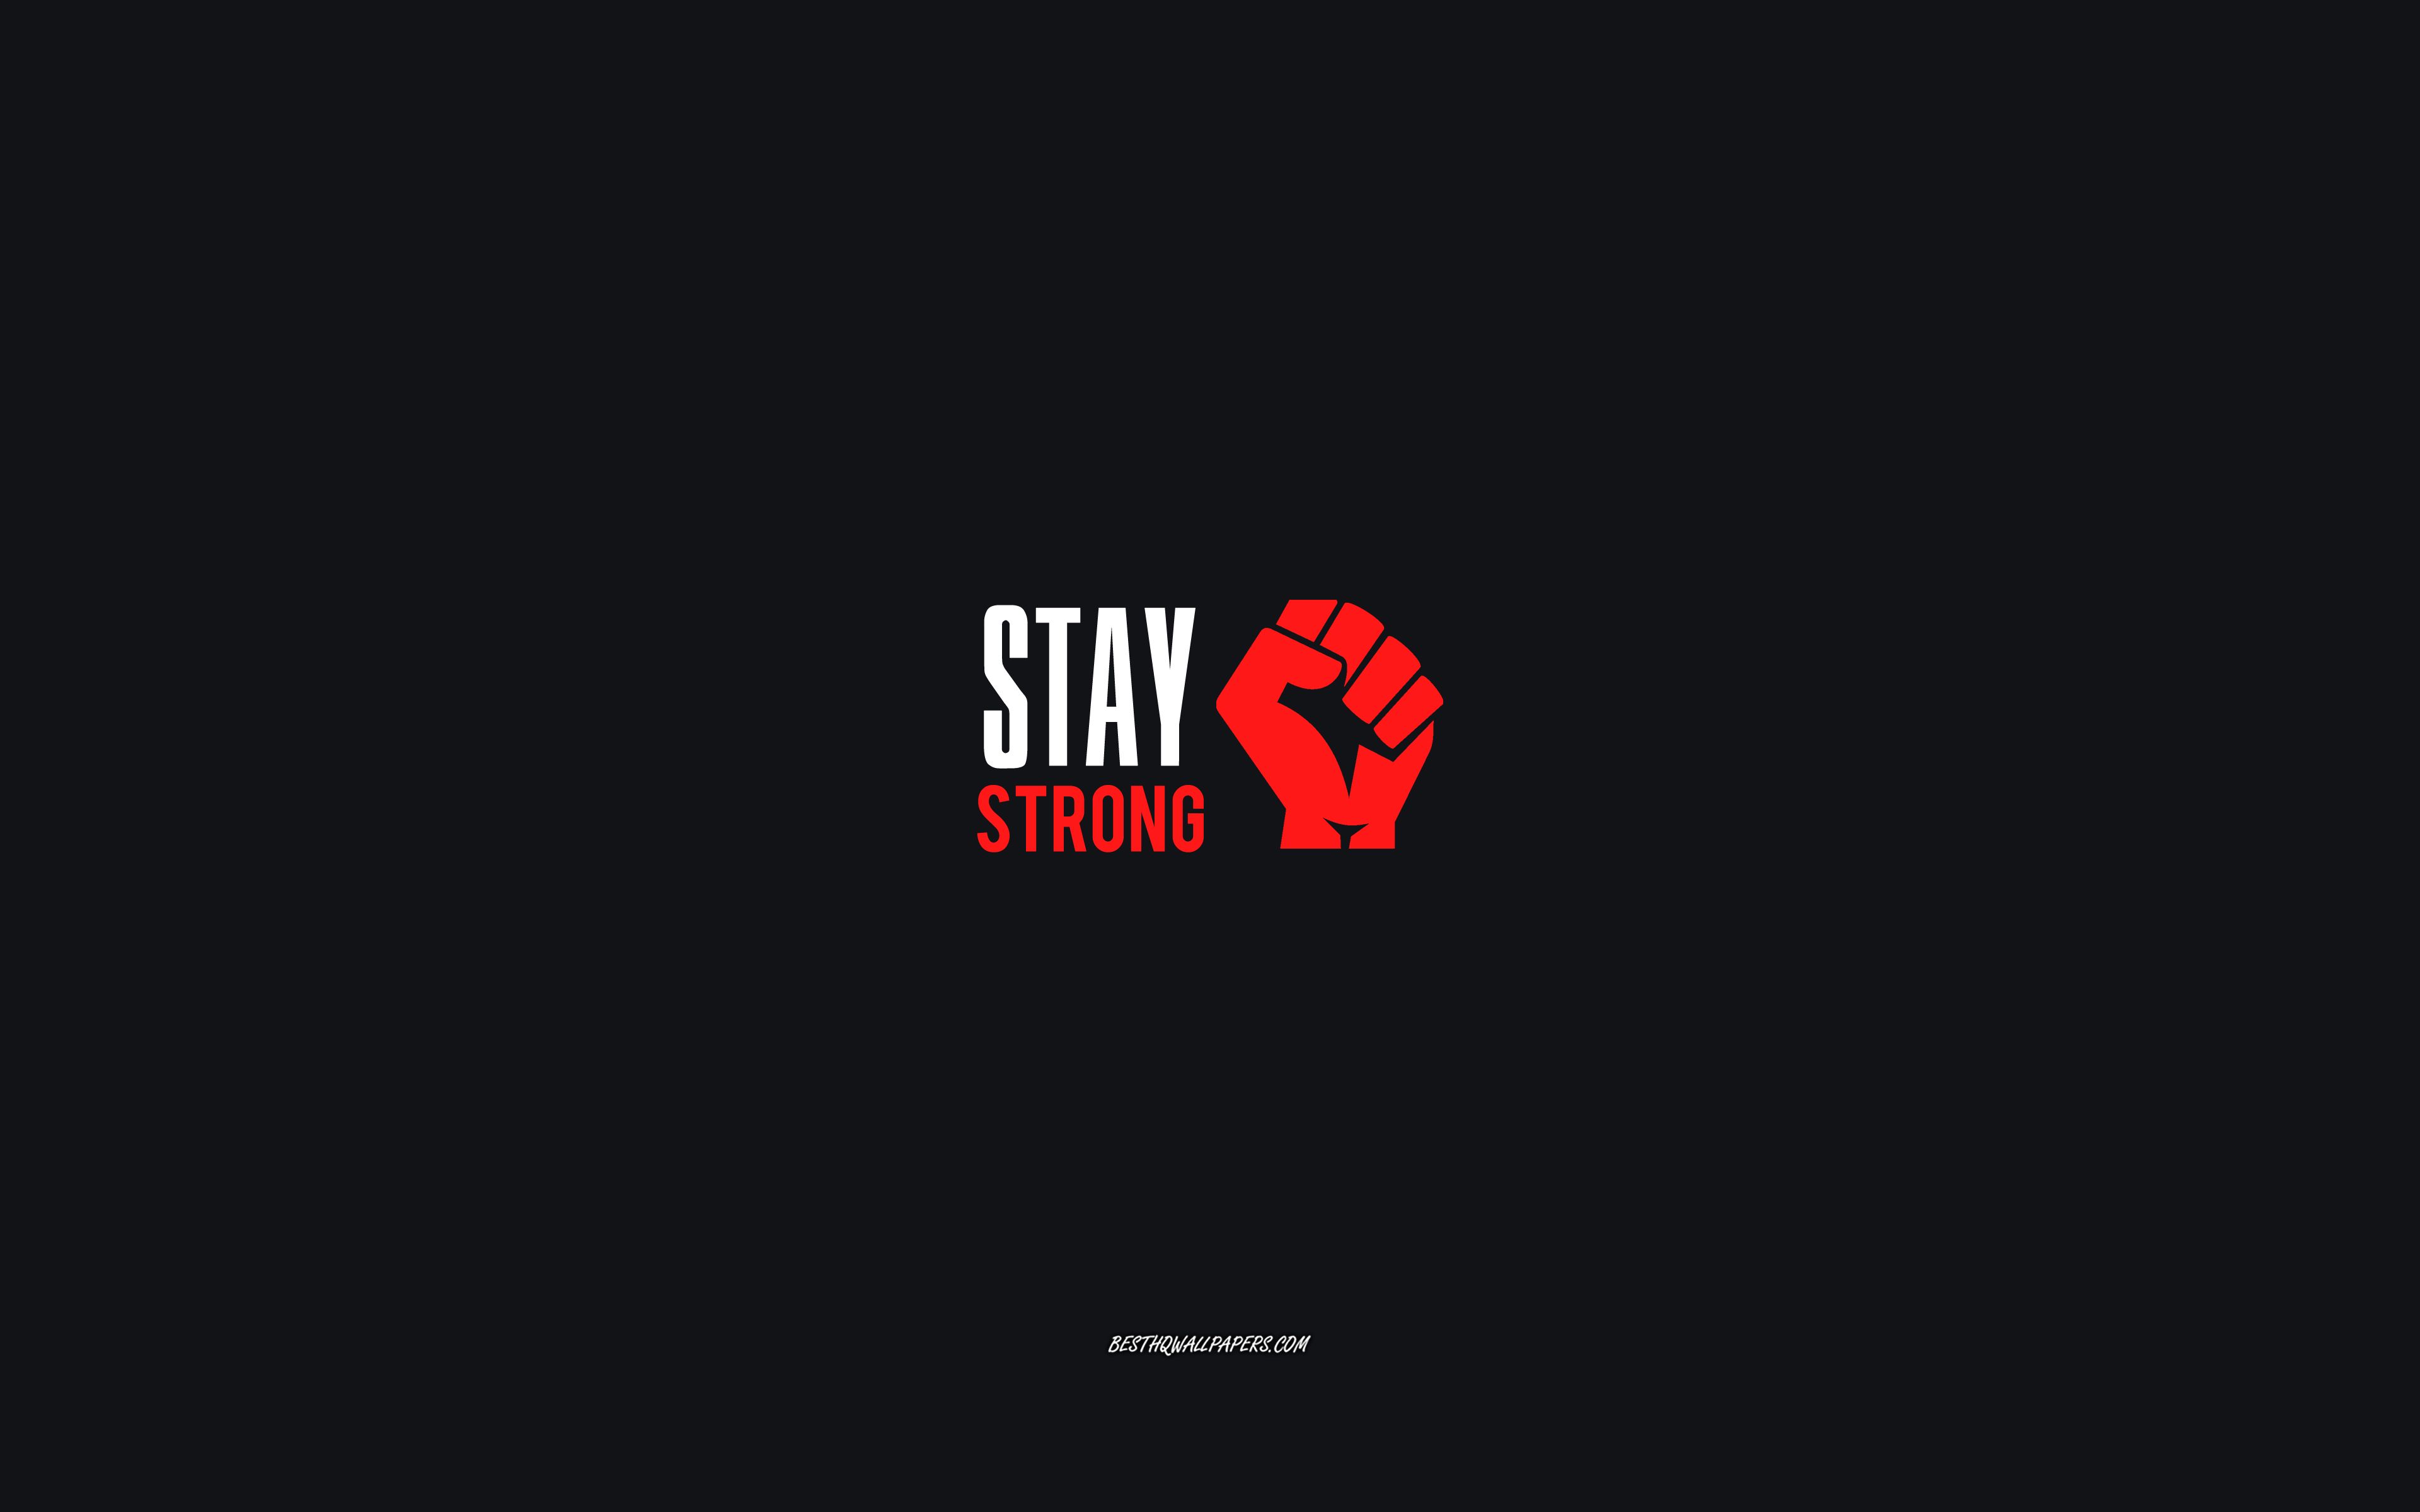 Download wallpaper Stay strong, motivation, inspiration, short phrases, Stay strong concepts for desktop with resolution 3840x2400. High Quality HD picture wallpaper